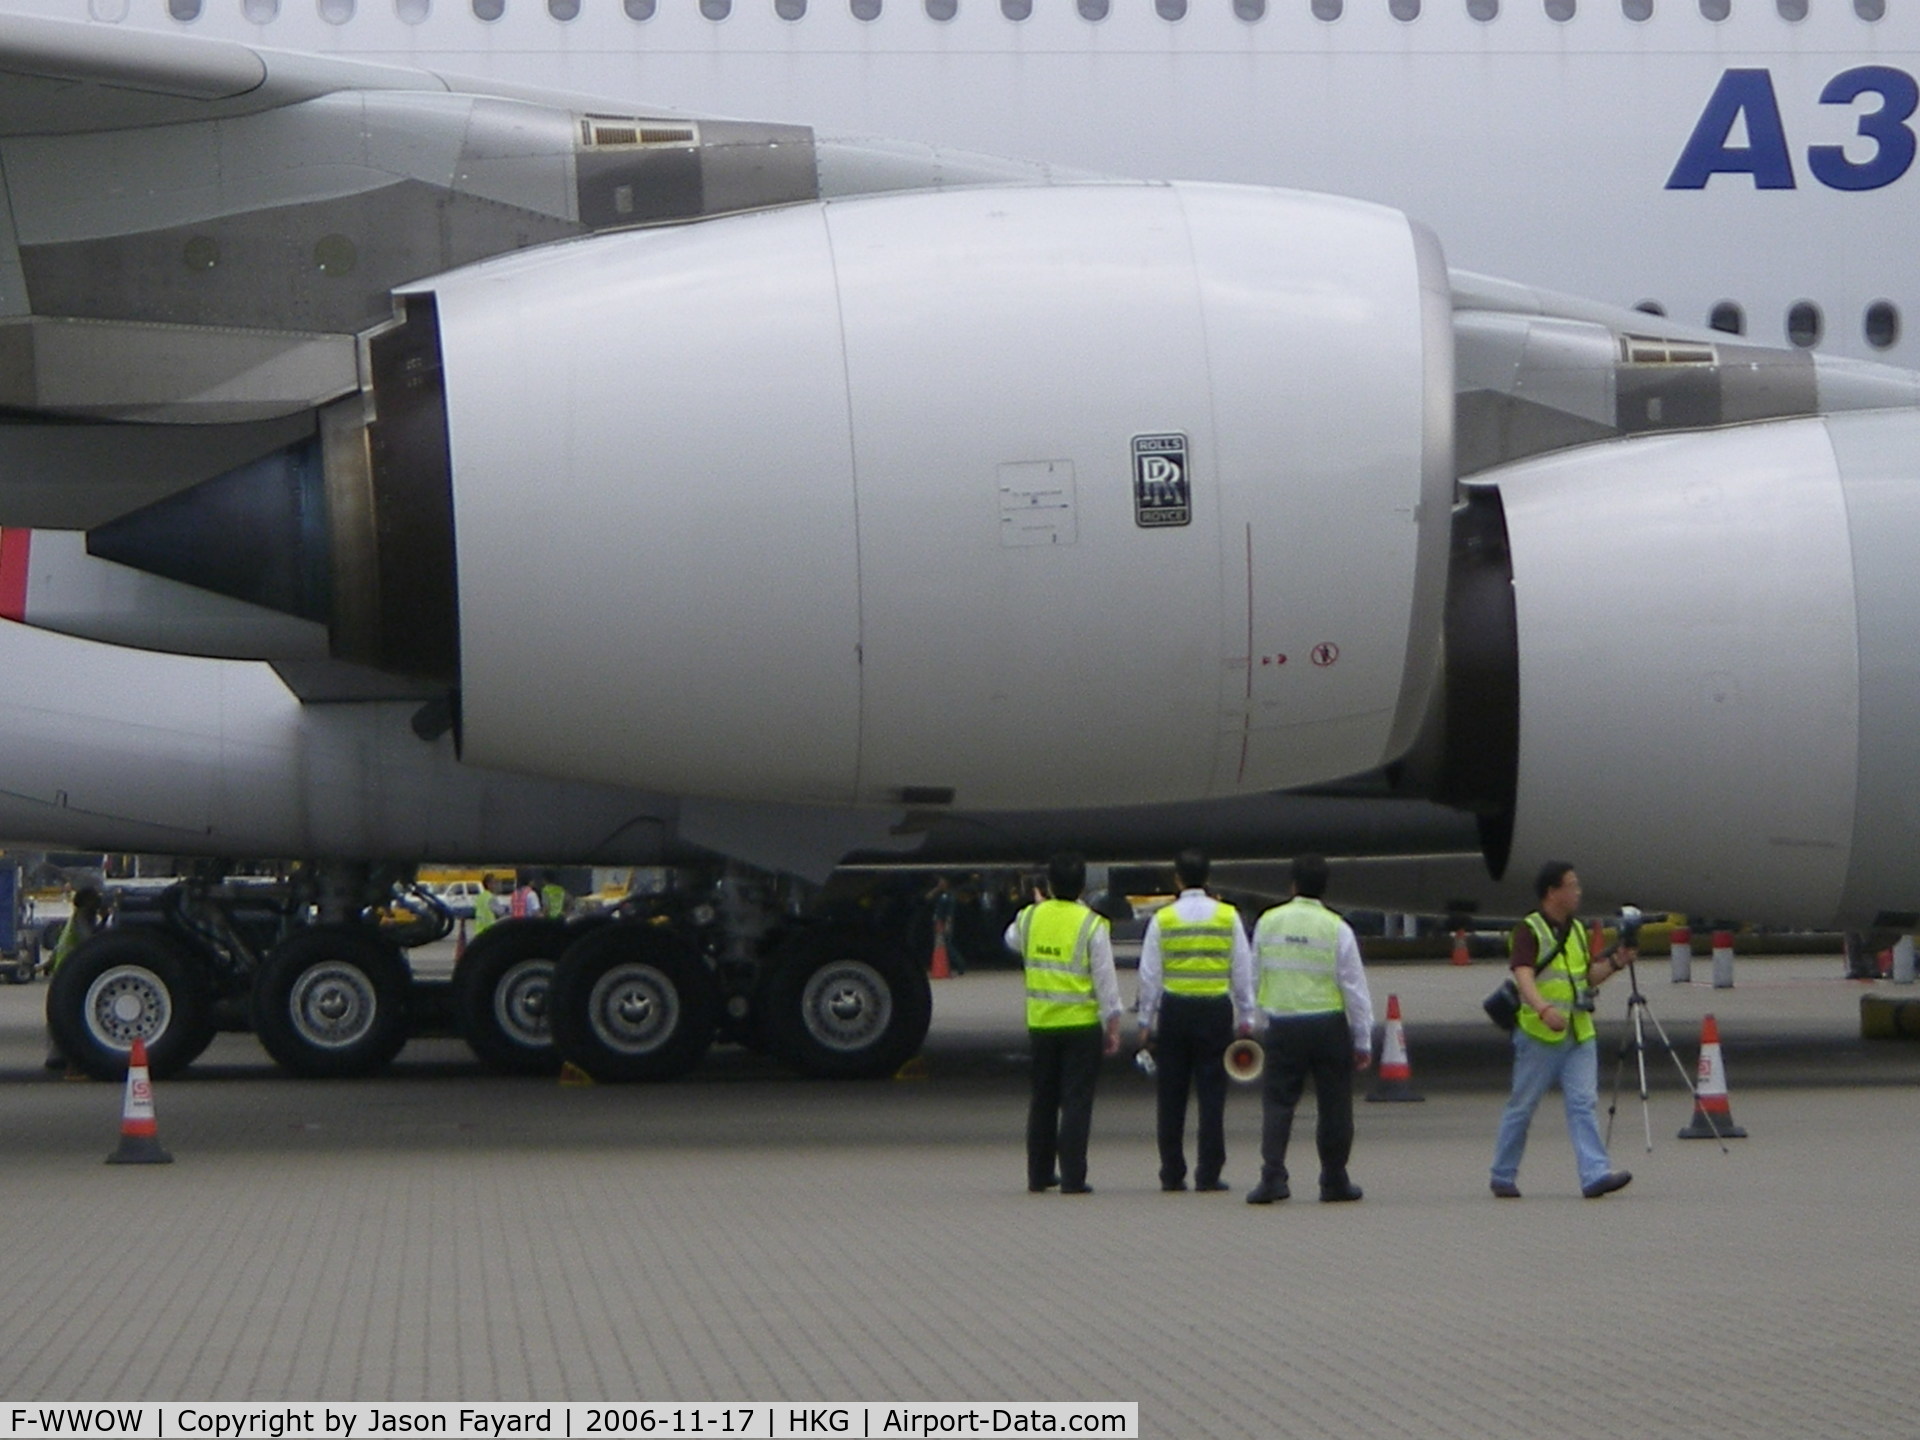 F-WWOW, 2005 Airbus A380-841 C/N 001, R/H OTBD engine after arrival in HKG